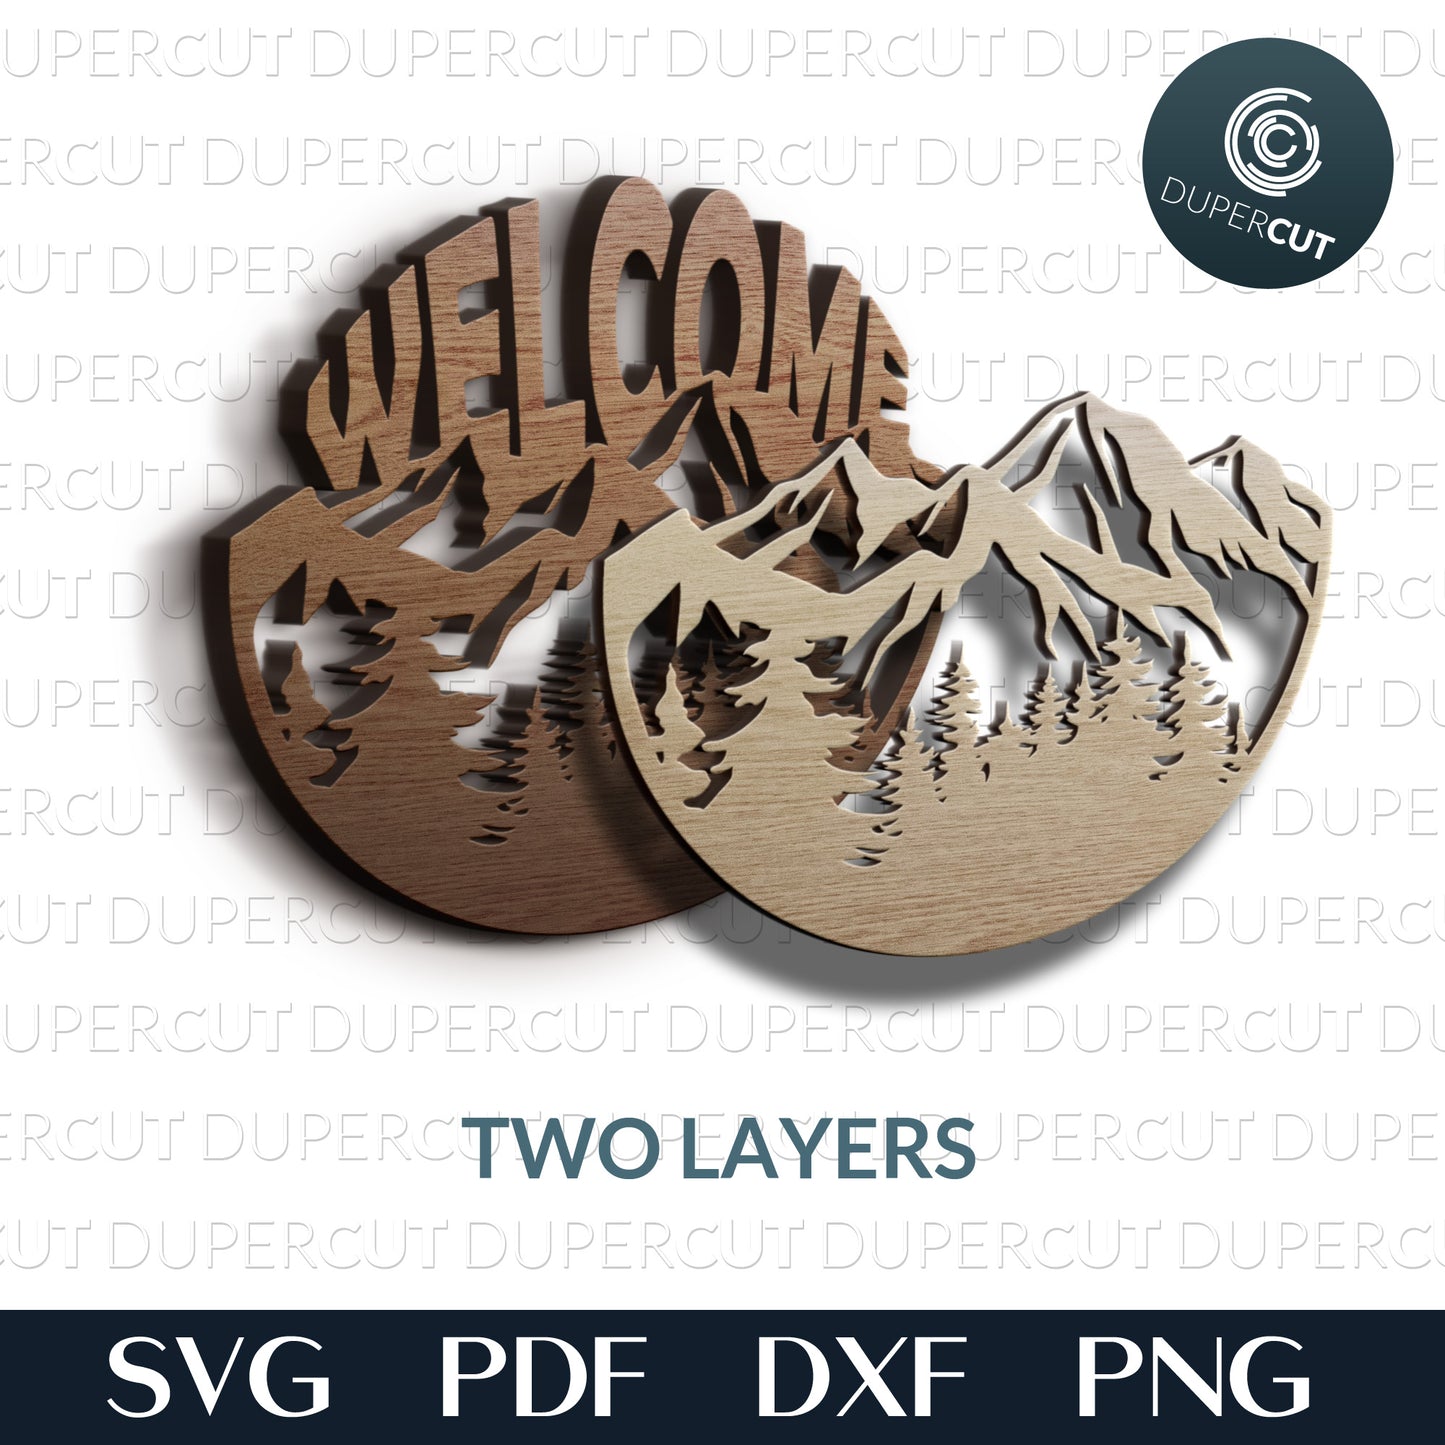 Mountain scene welcome sign cabin decor - layered cutting files SVG PDF DXF template for laser cutting and engraving, Glowforge and CNC plasma machines